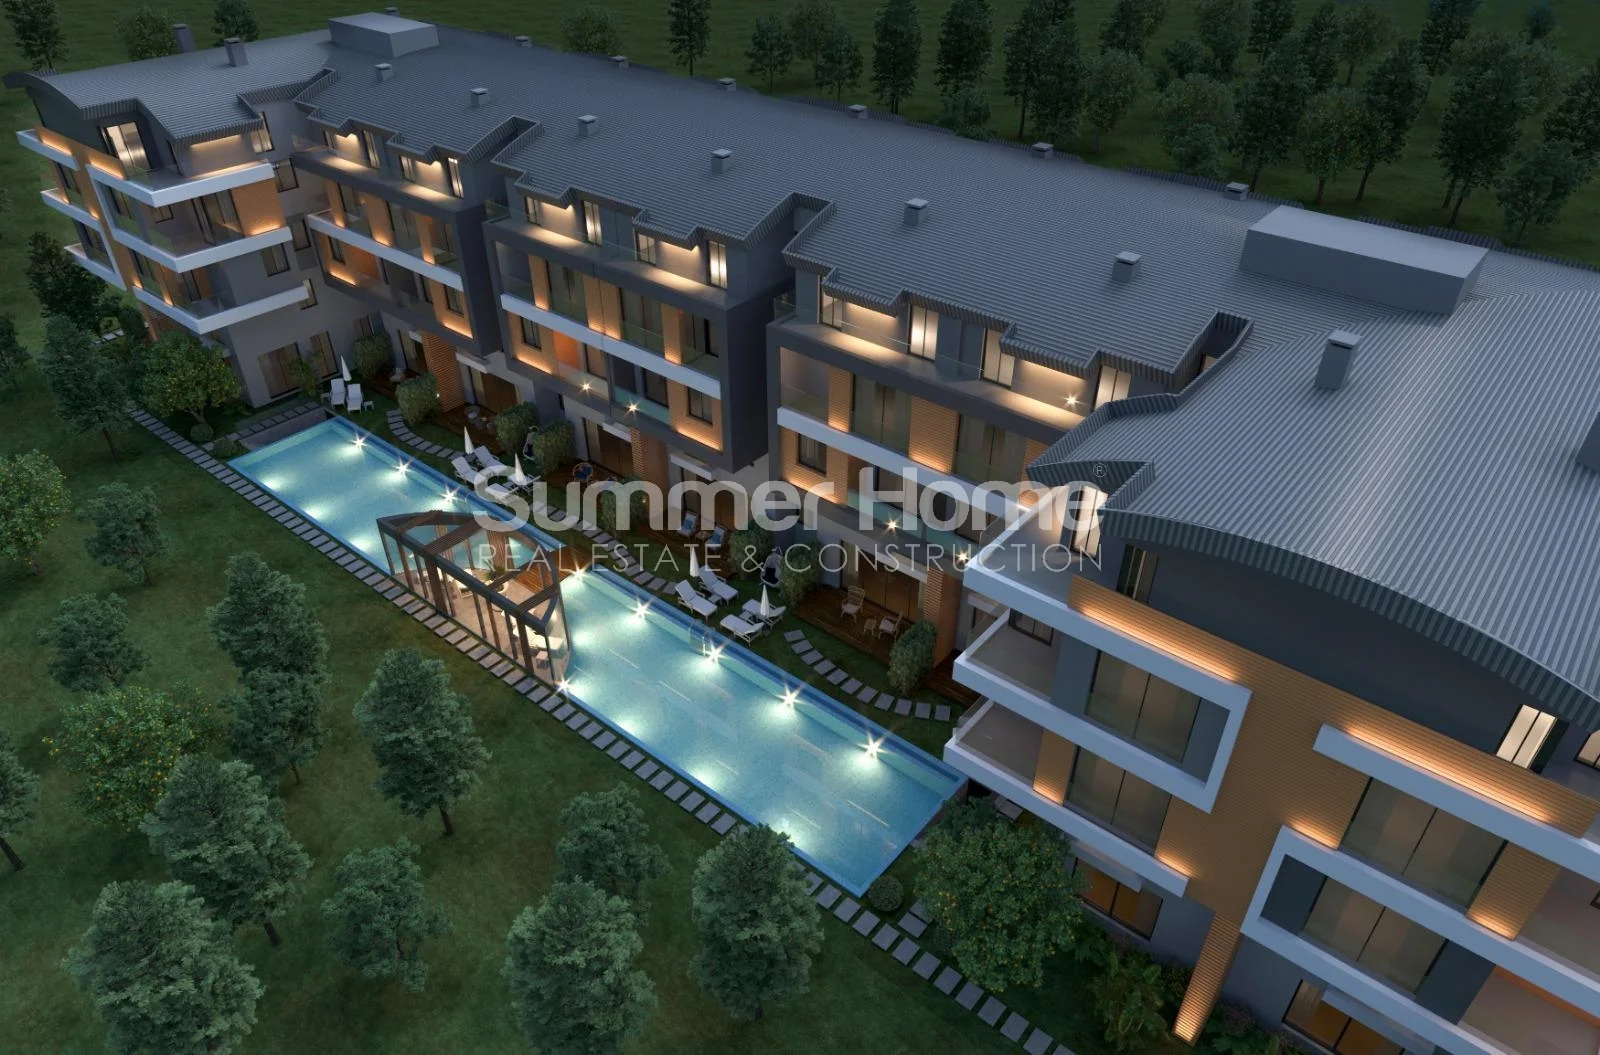 Cozy apartments with amenities in Antalya for sale  Plan - 9